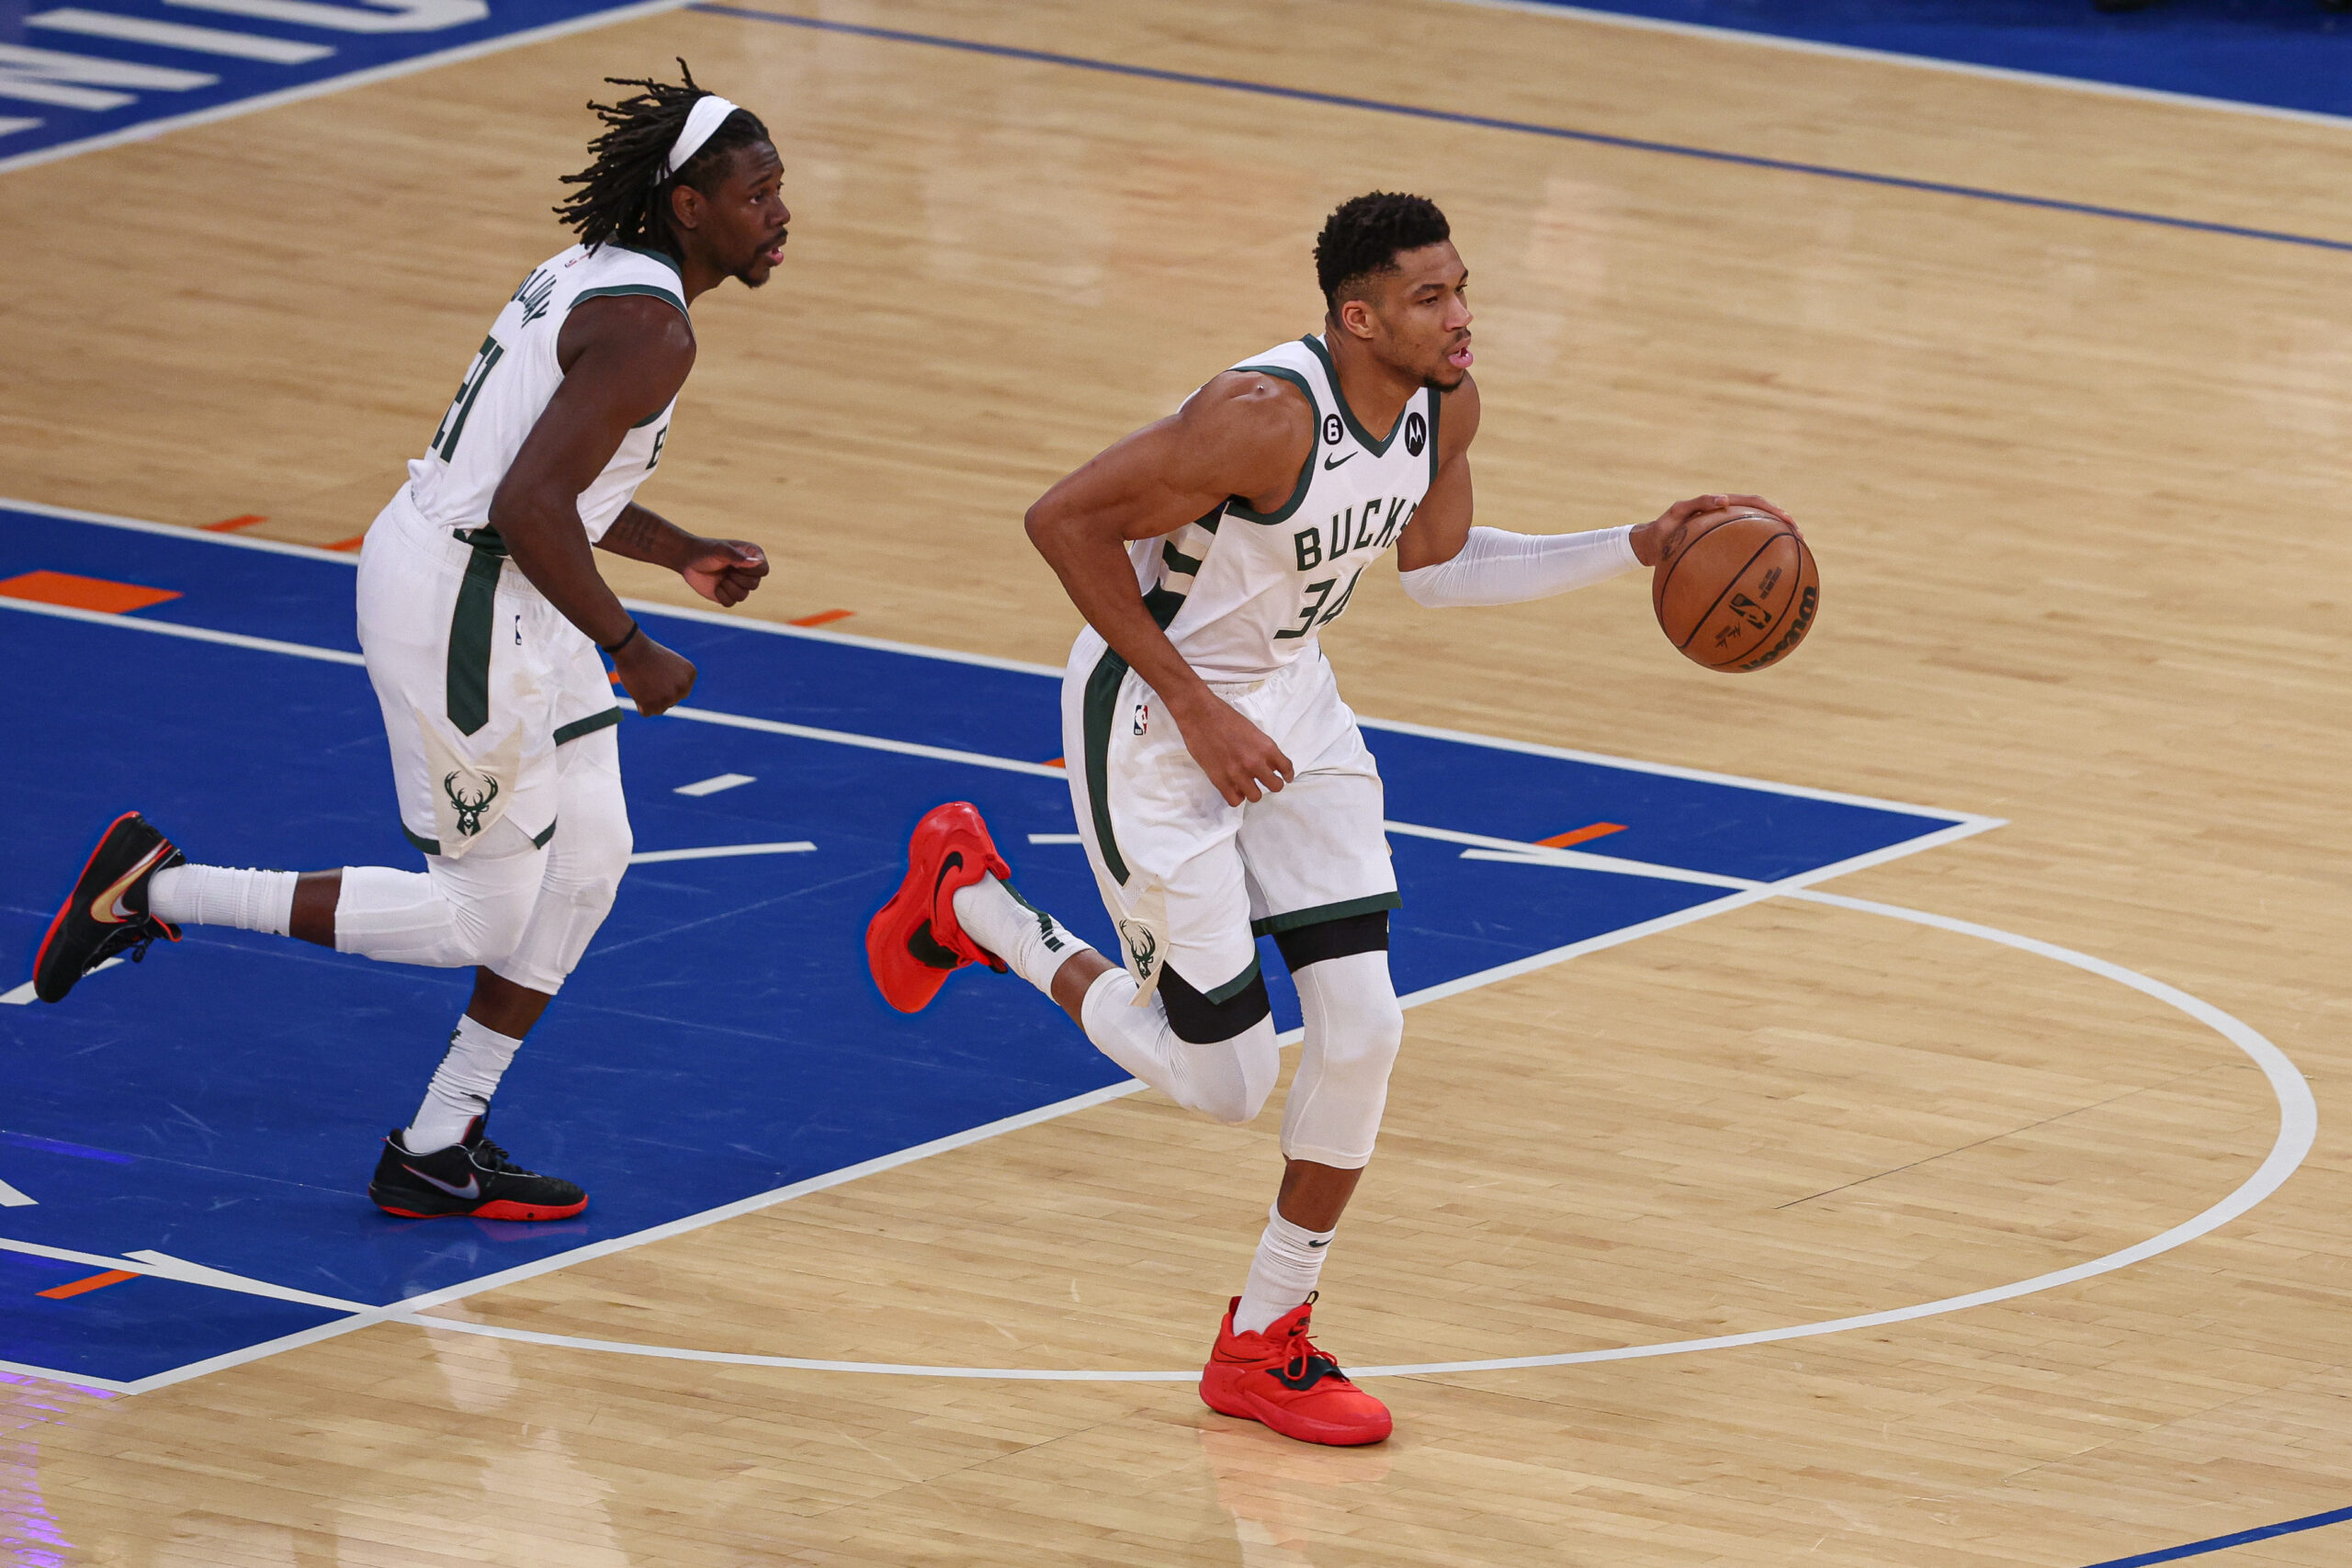 Jan 9, 2023; New York, New York, USA; Milwaukee Bucks forward Giannis Antetokounmpo (34) dribbles up court in front of guard Jrue Holiday (21) during the first quarter against the New York Knicks at Madison Square Garden. Mandatory Credit: Vincent Carchietta-USA TODAY Sports (NBA News)